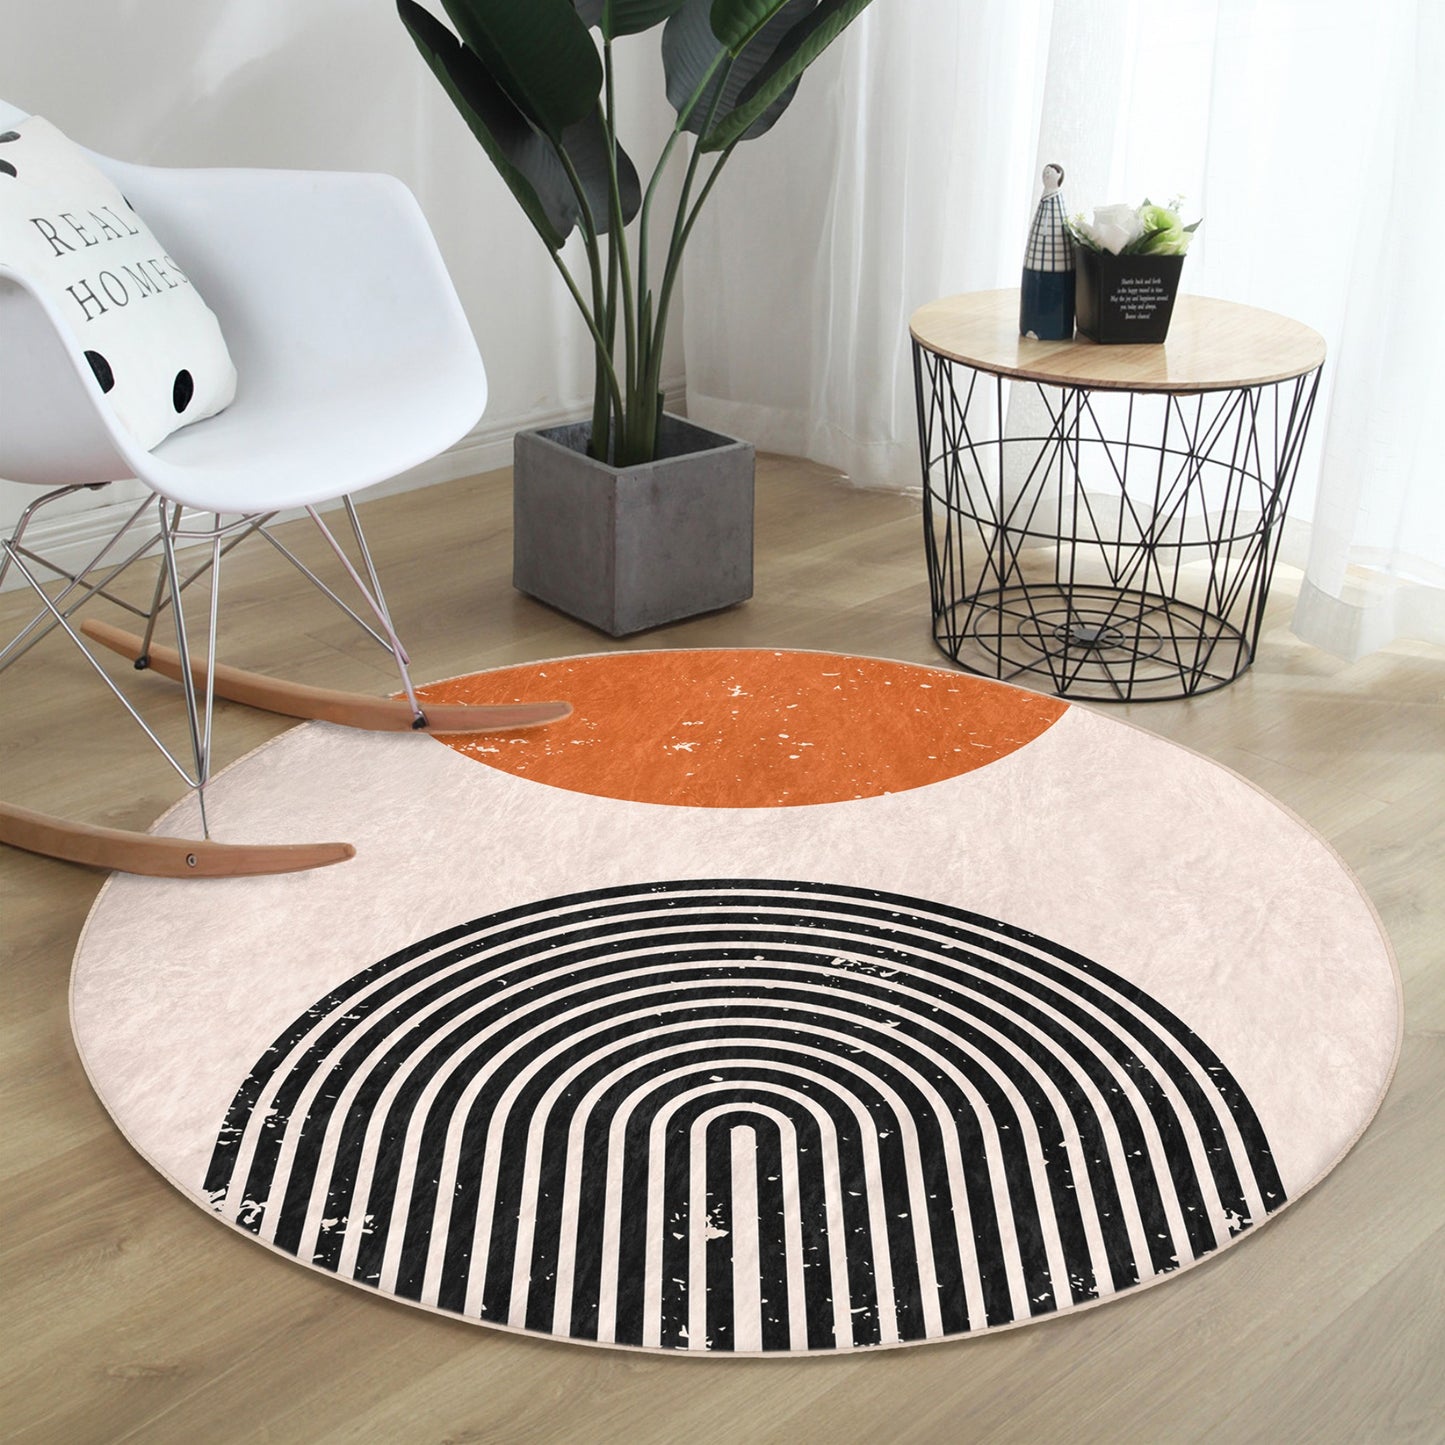 Round Patterned Floor Rug - Creative Accent